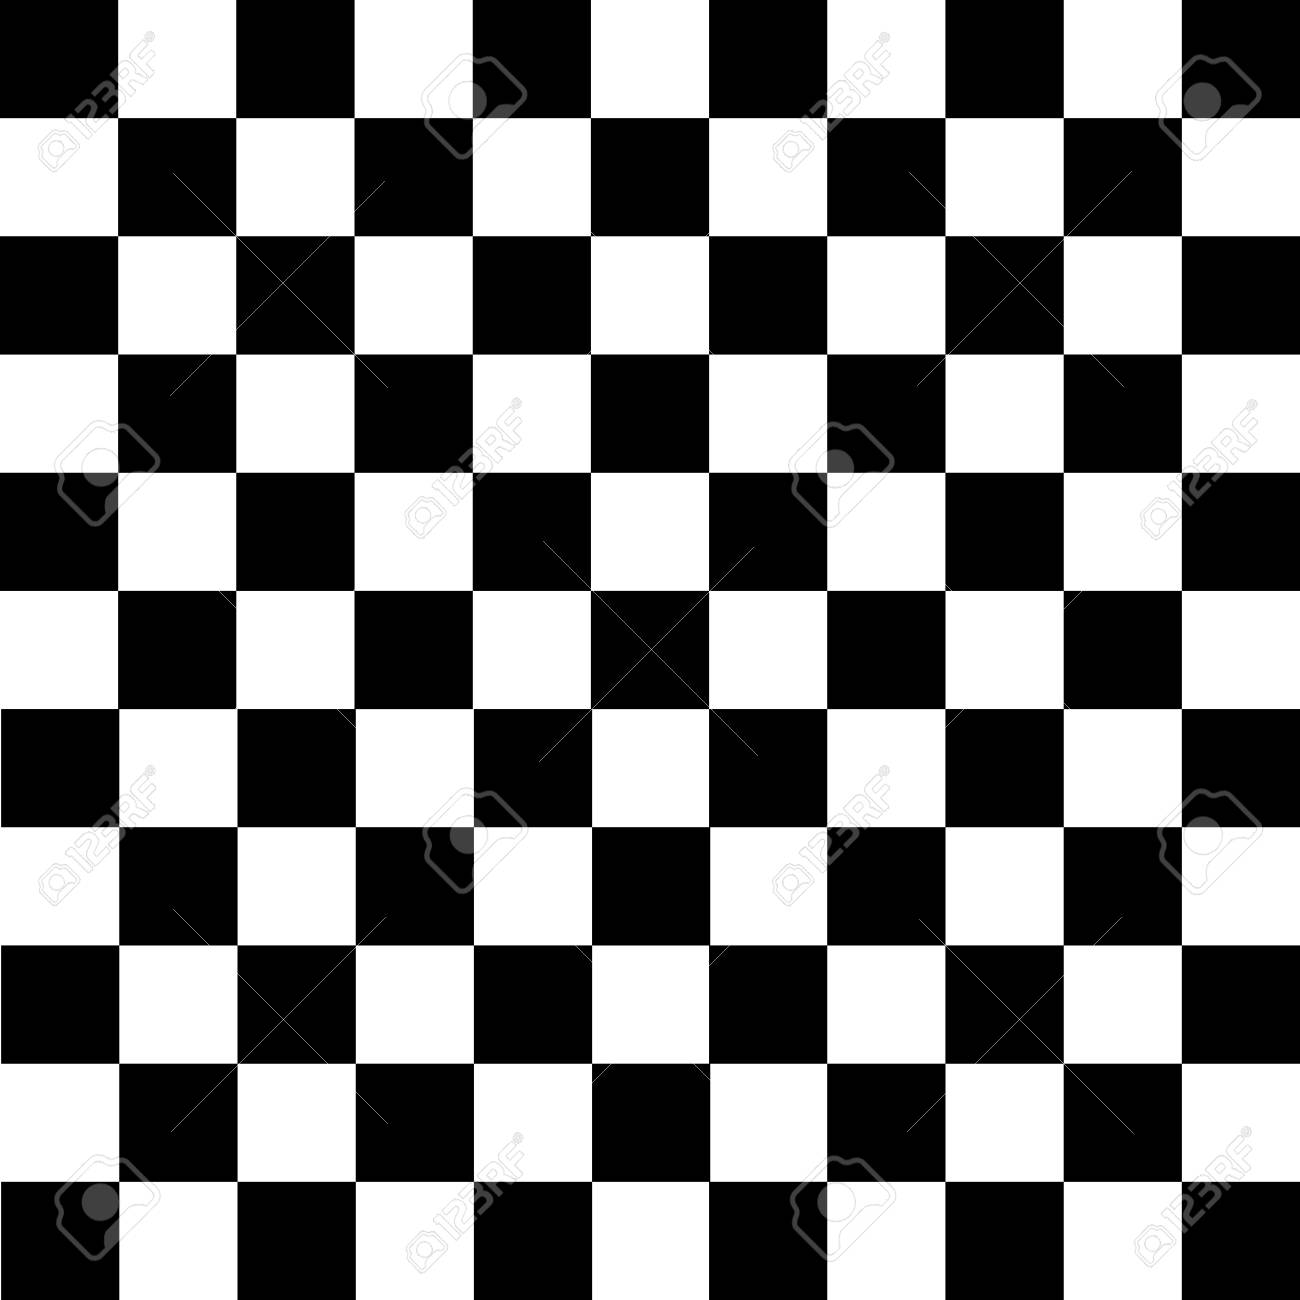 Black And White Checkered Background Chess Pattern Vector